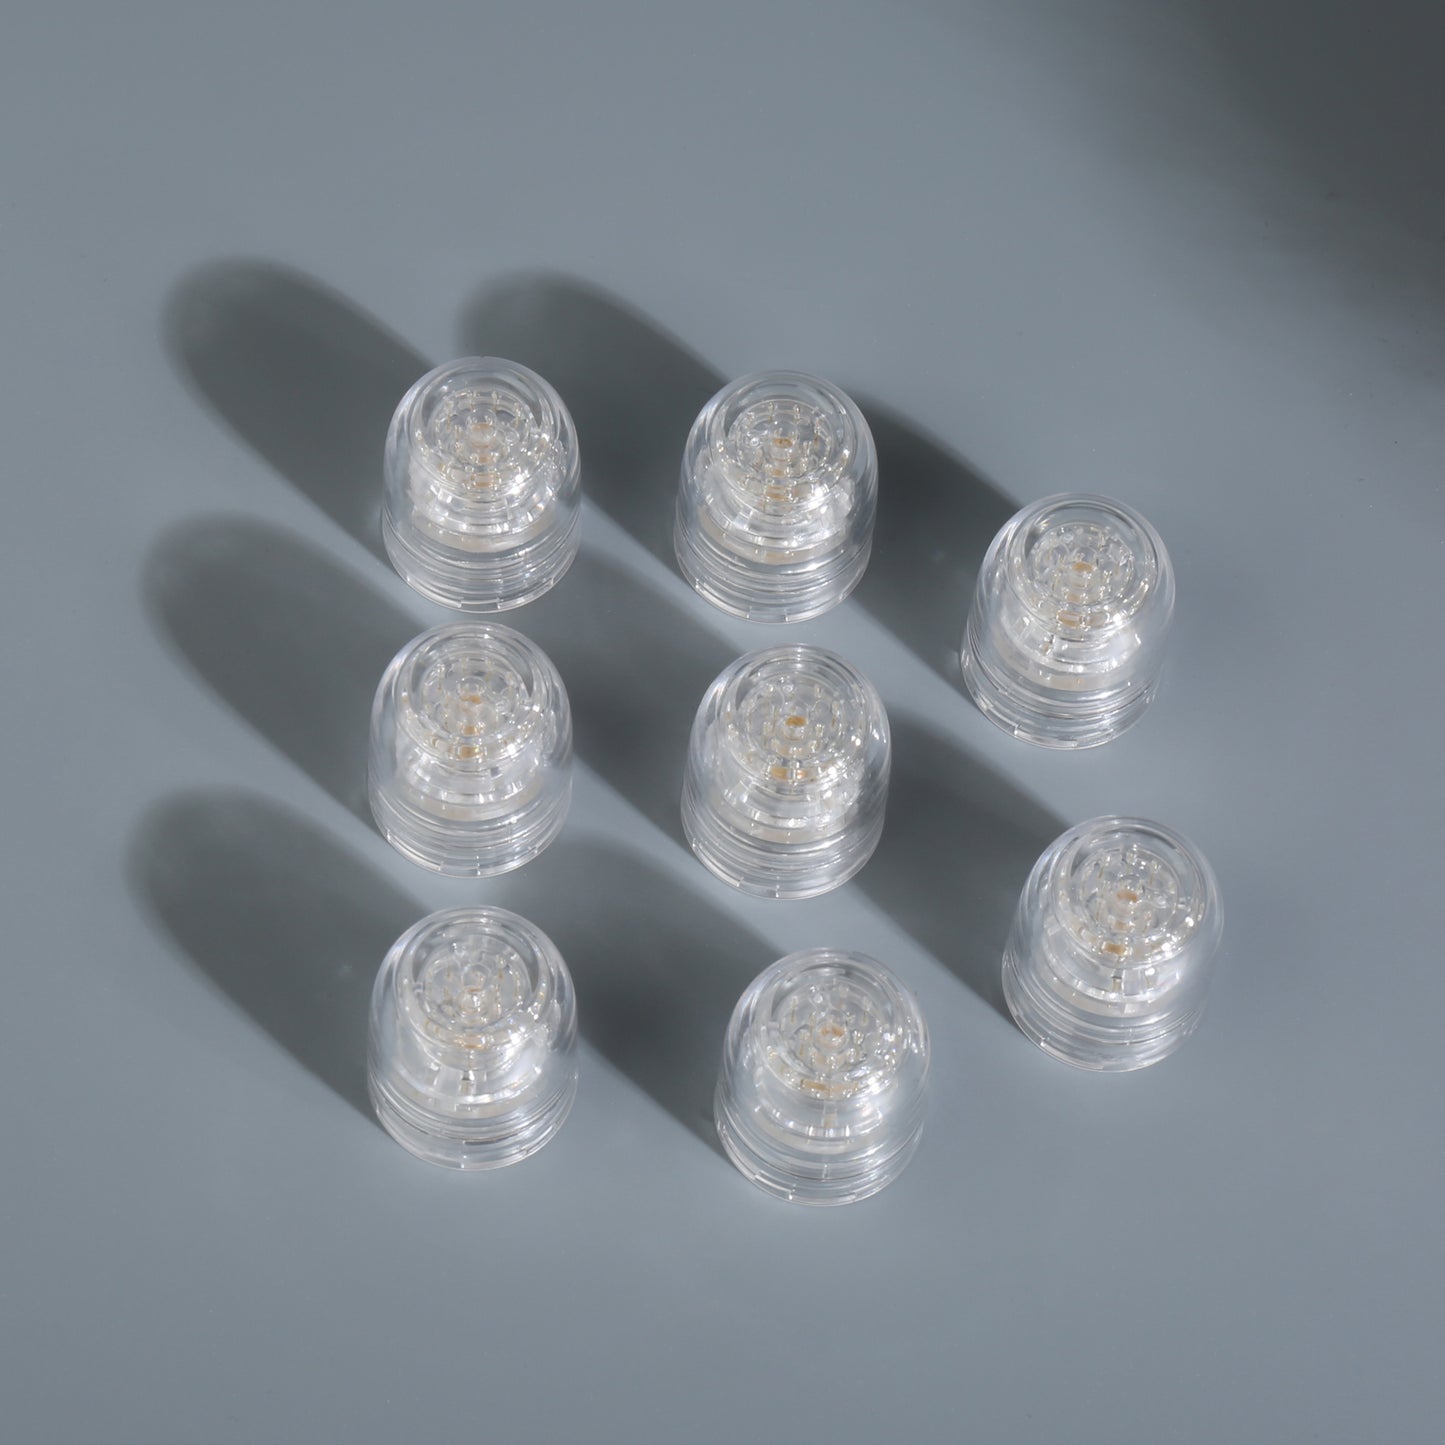 Sterile Disposable 0.5mm Needle Heads